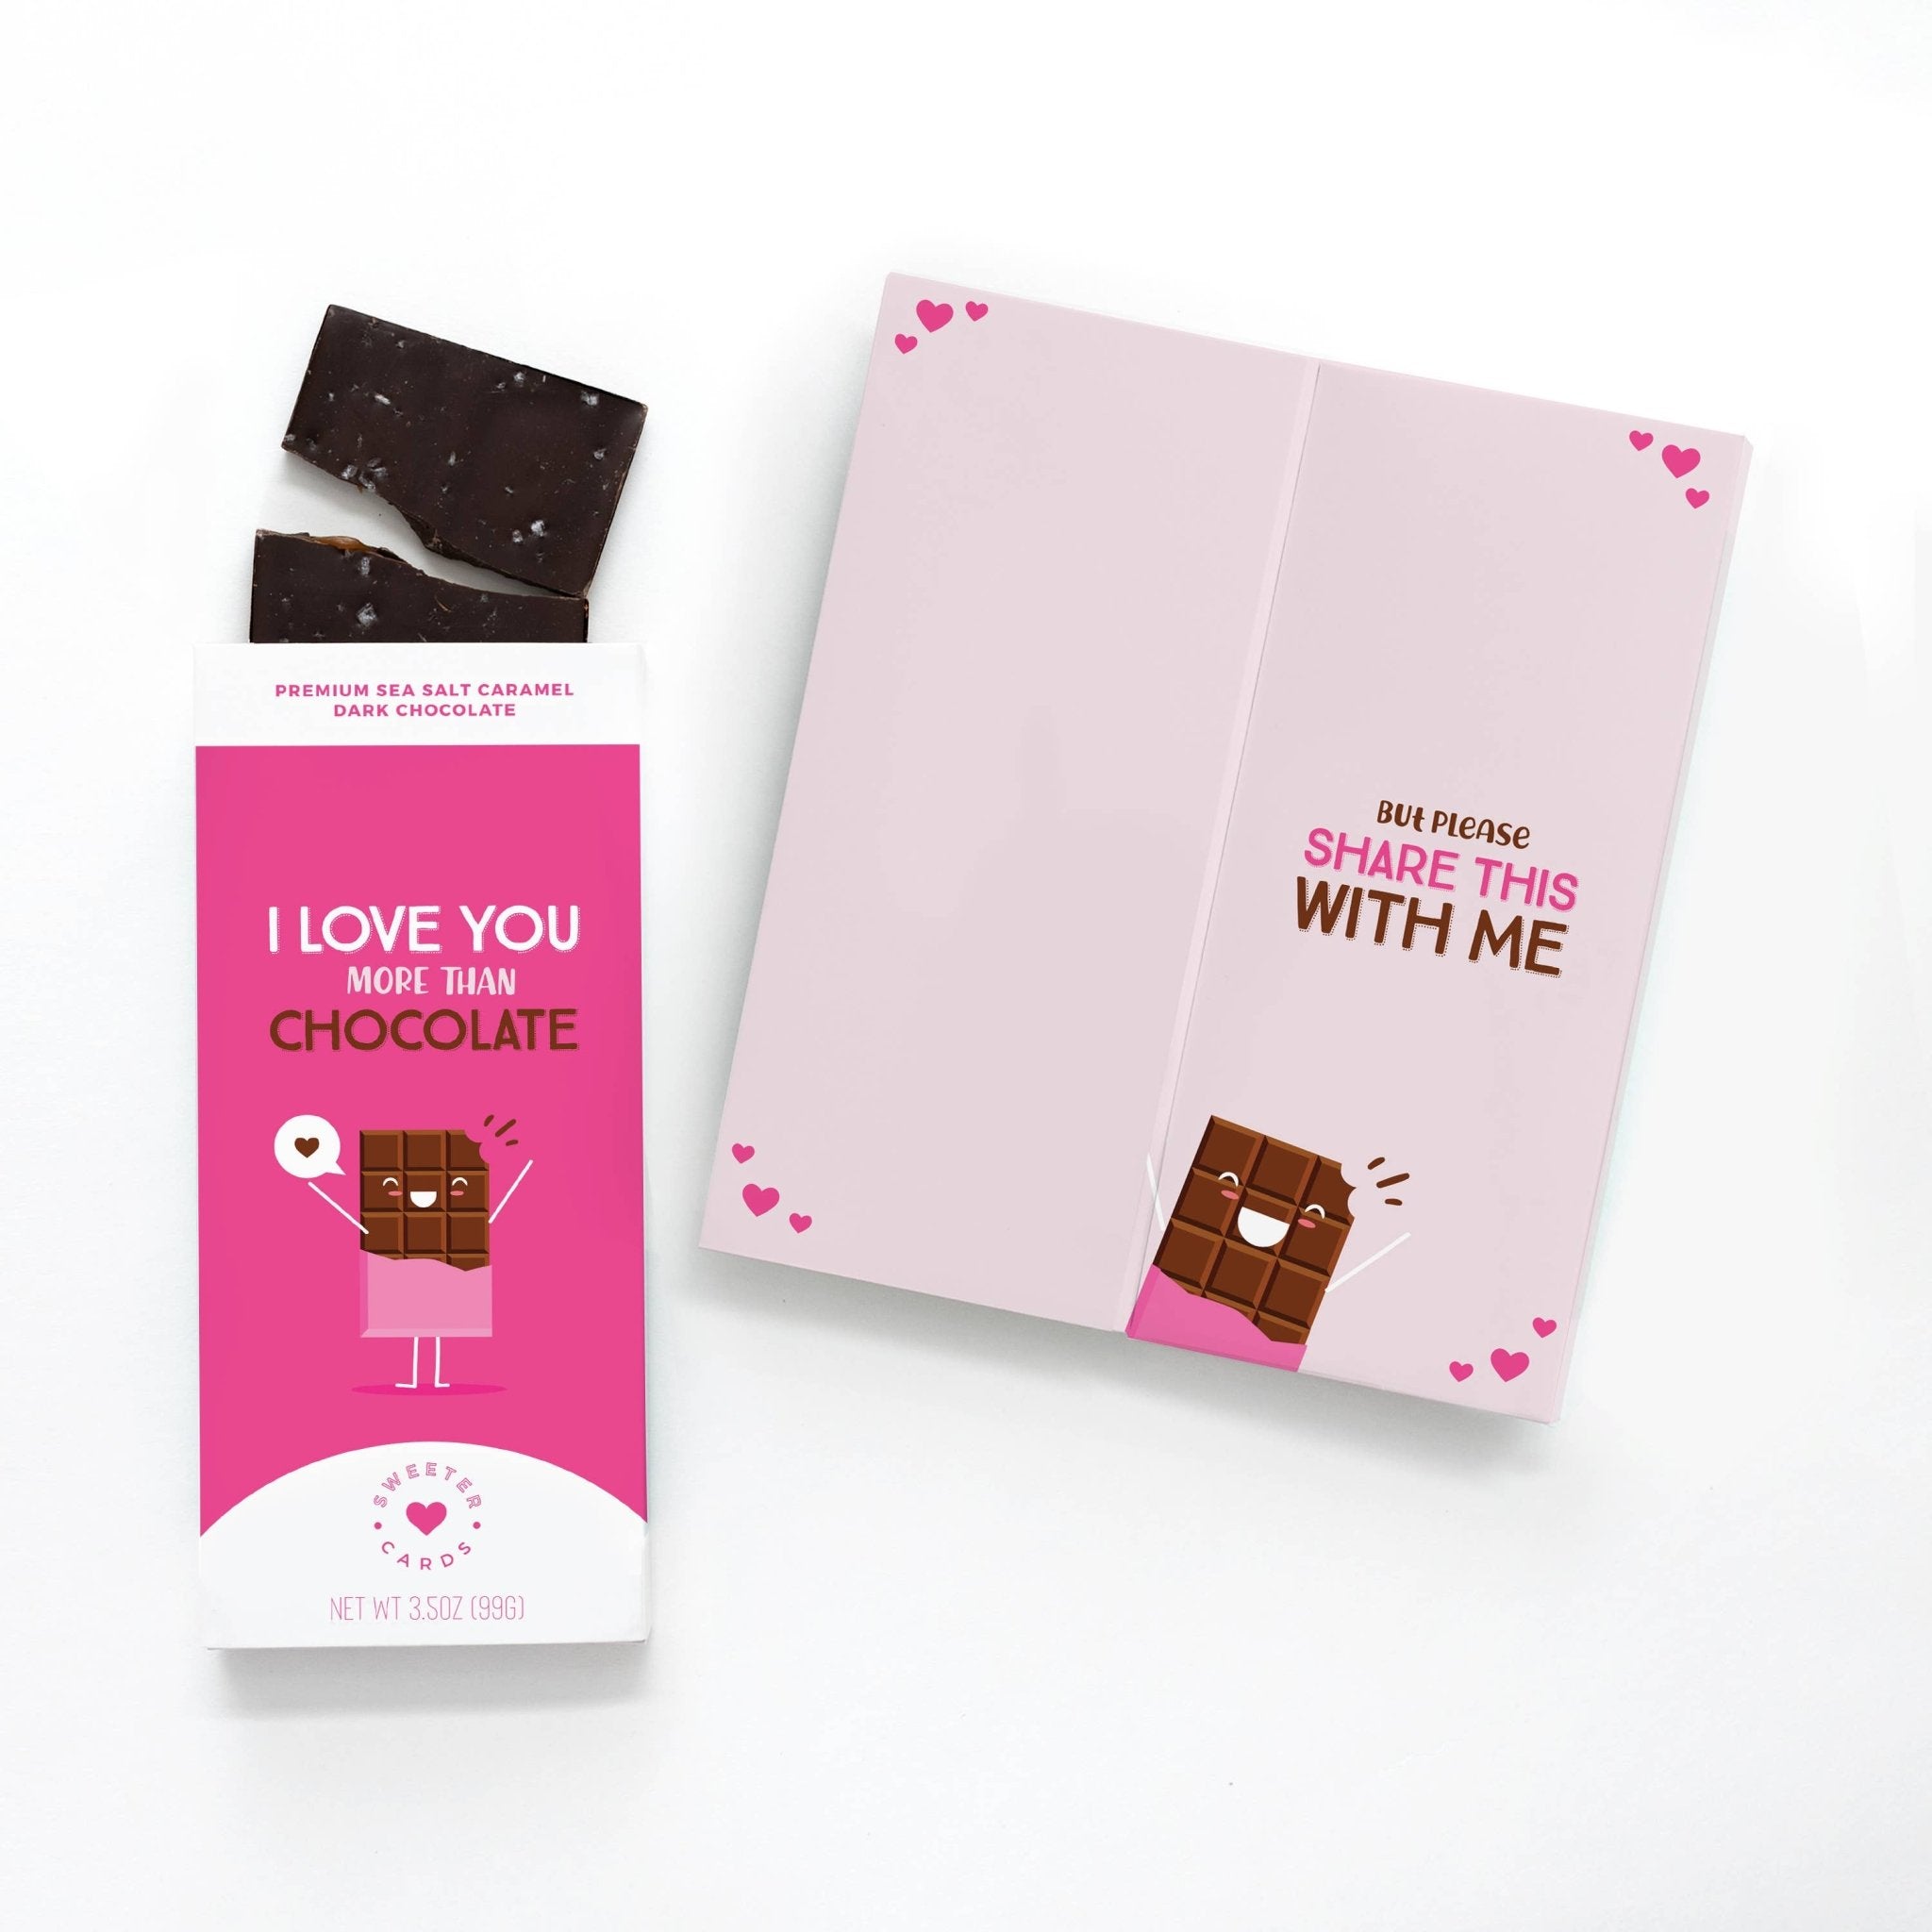 Love Card with Chocolate Bar Inside! More than Chocolate! - Spiral Circle